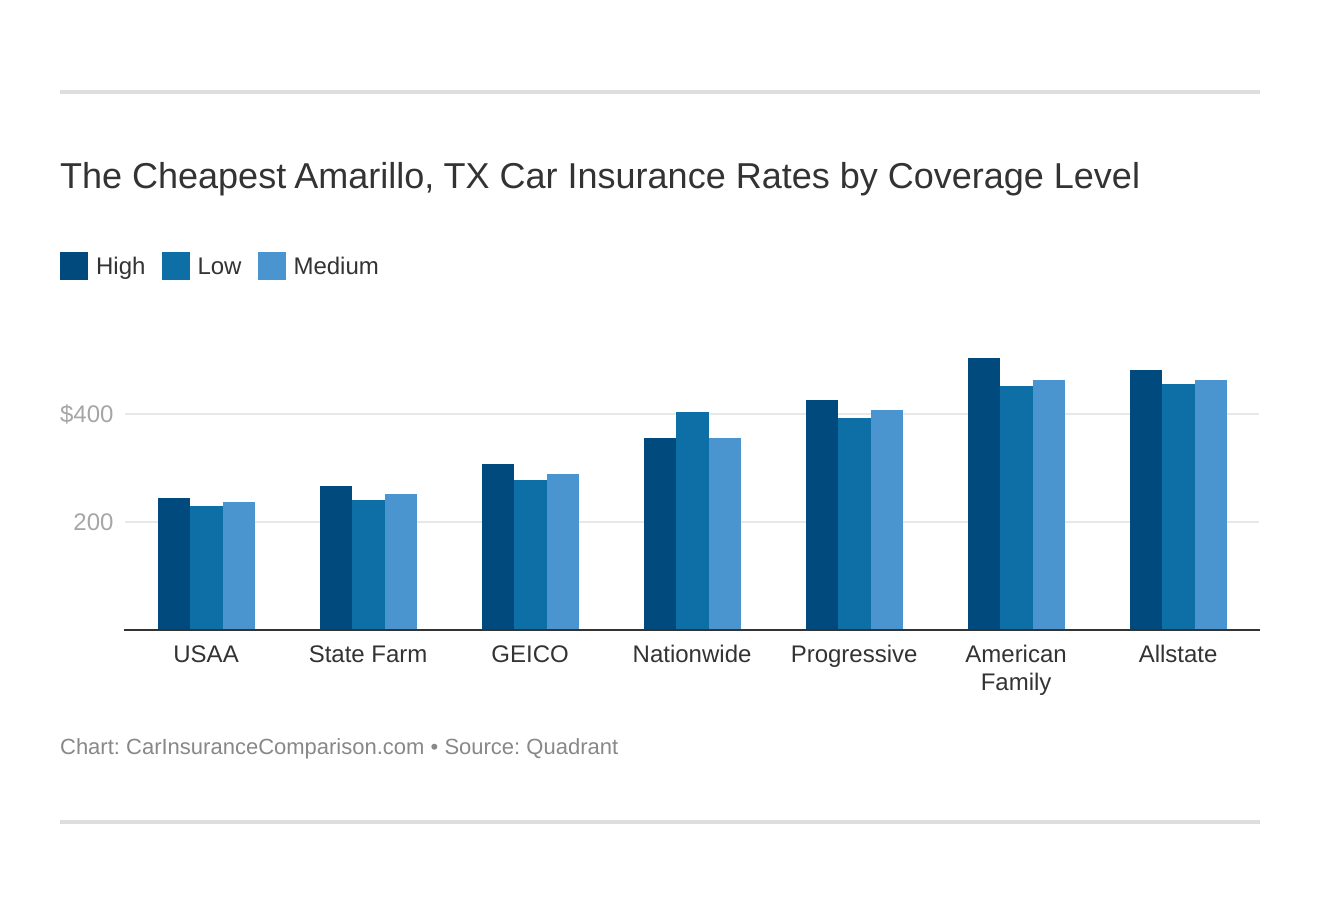 The Cheapest Amarillo, TX Car Insurance Rates by Coverage Level